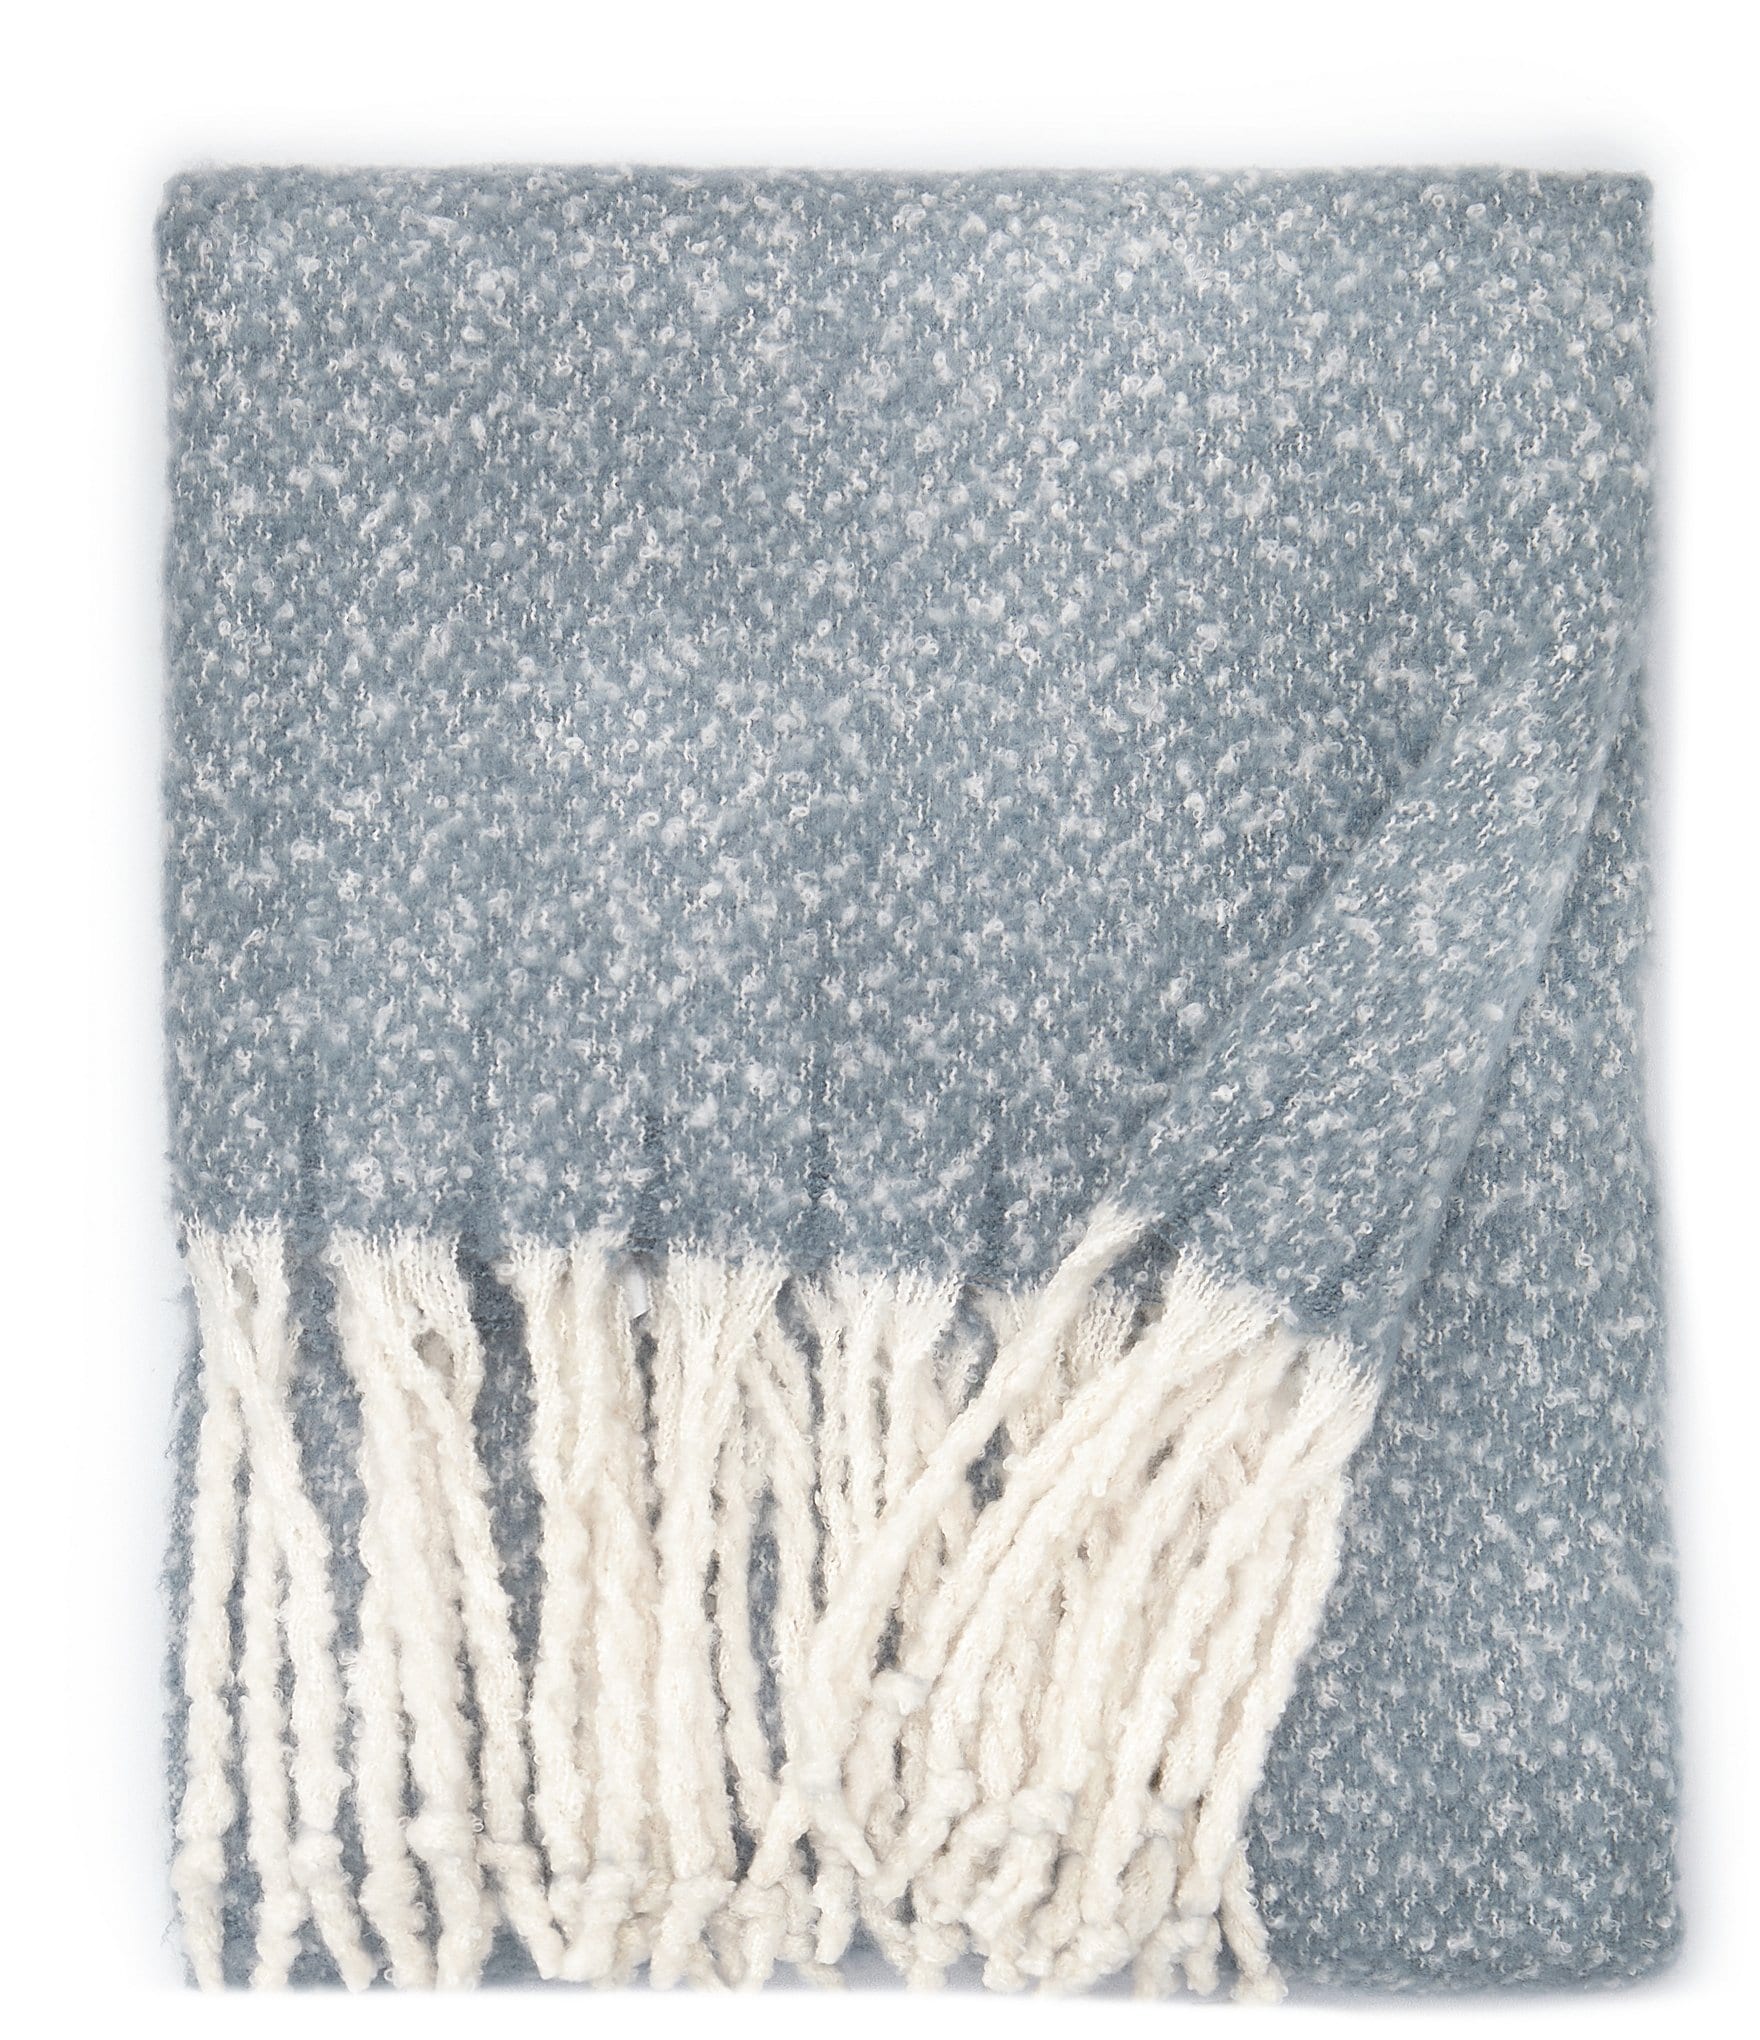 https://dimg.dillards.com/is/image/DillardsZoom/zoom/noble-excellence-warm-shop-collection-dixon-faux-mohair-solid-throw-blanket/00000000_zi_67762443-912d-4aa2-af00-3ff5fd93d959.jpg